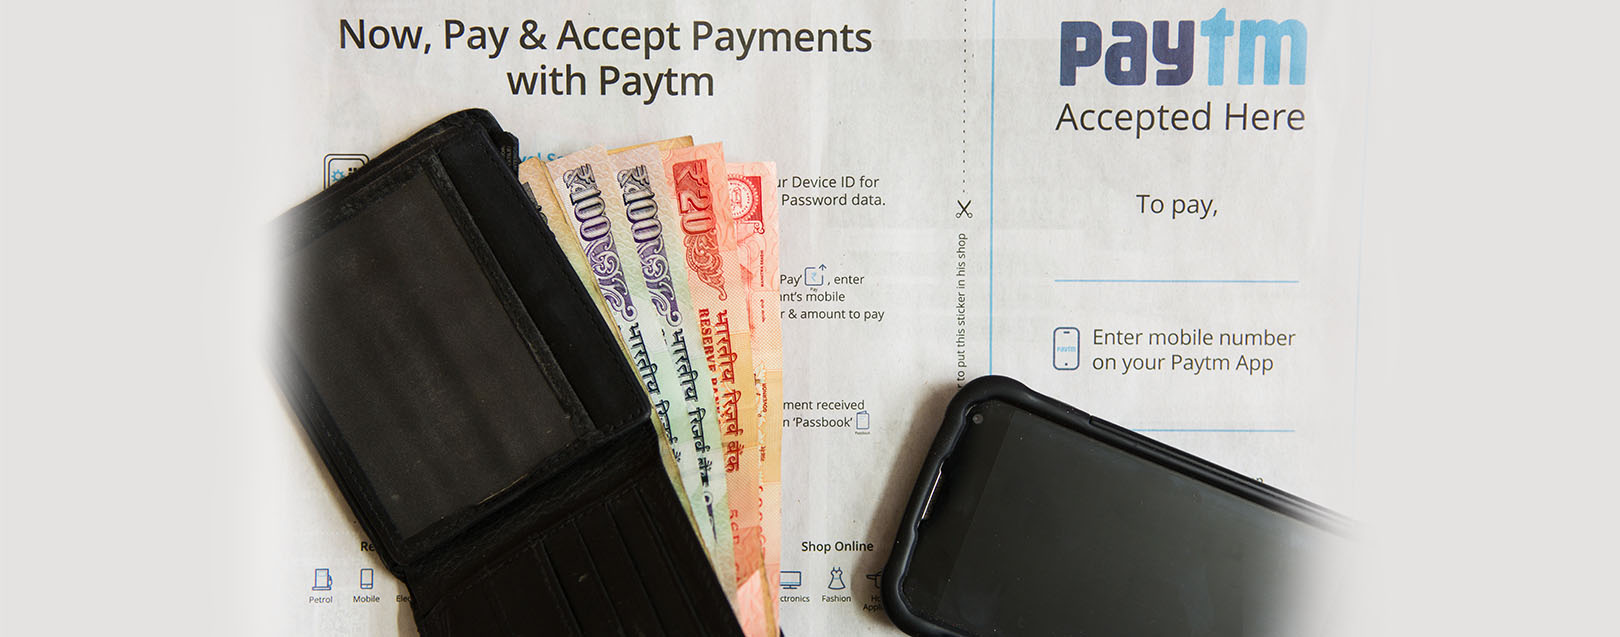 Digitisation ensures that people pay taxes: Paytm Chief